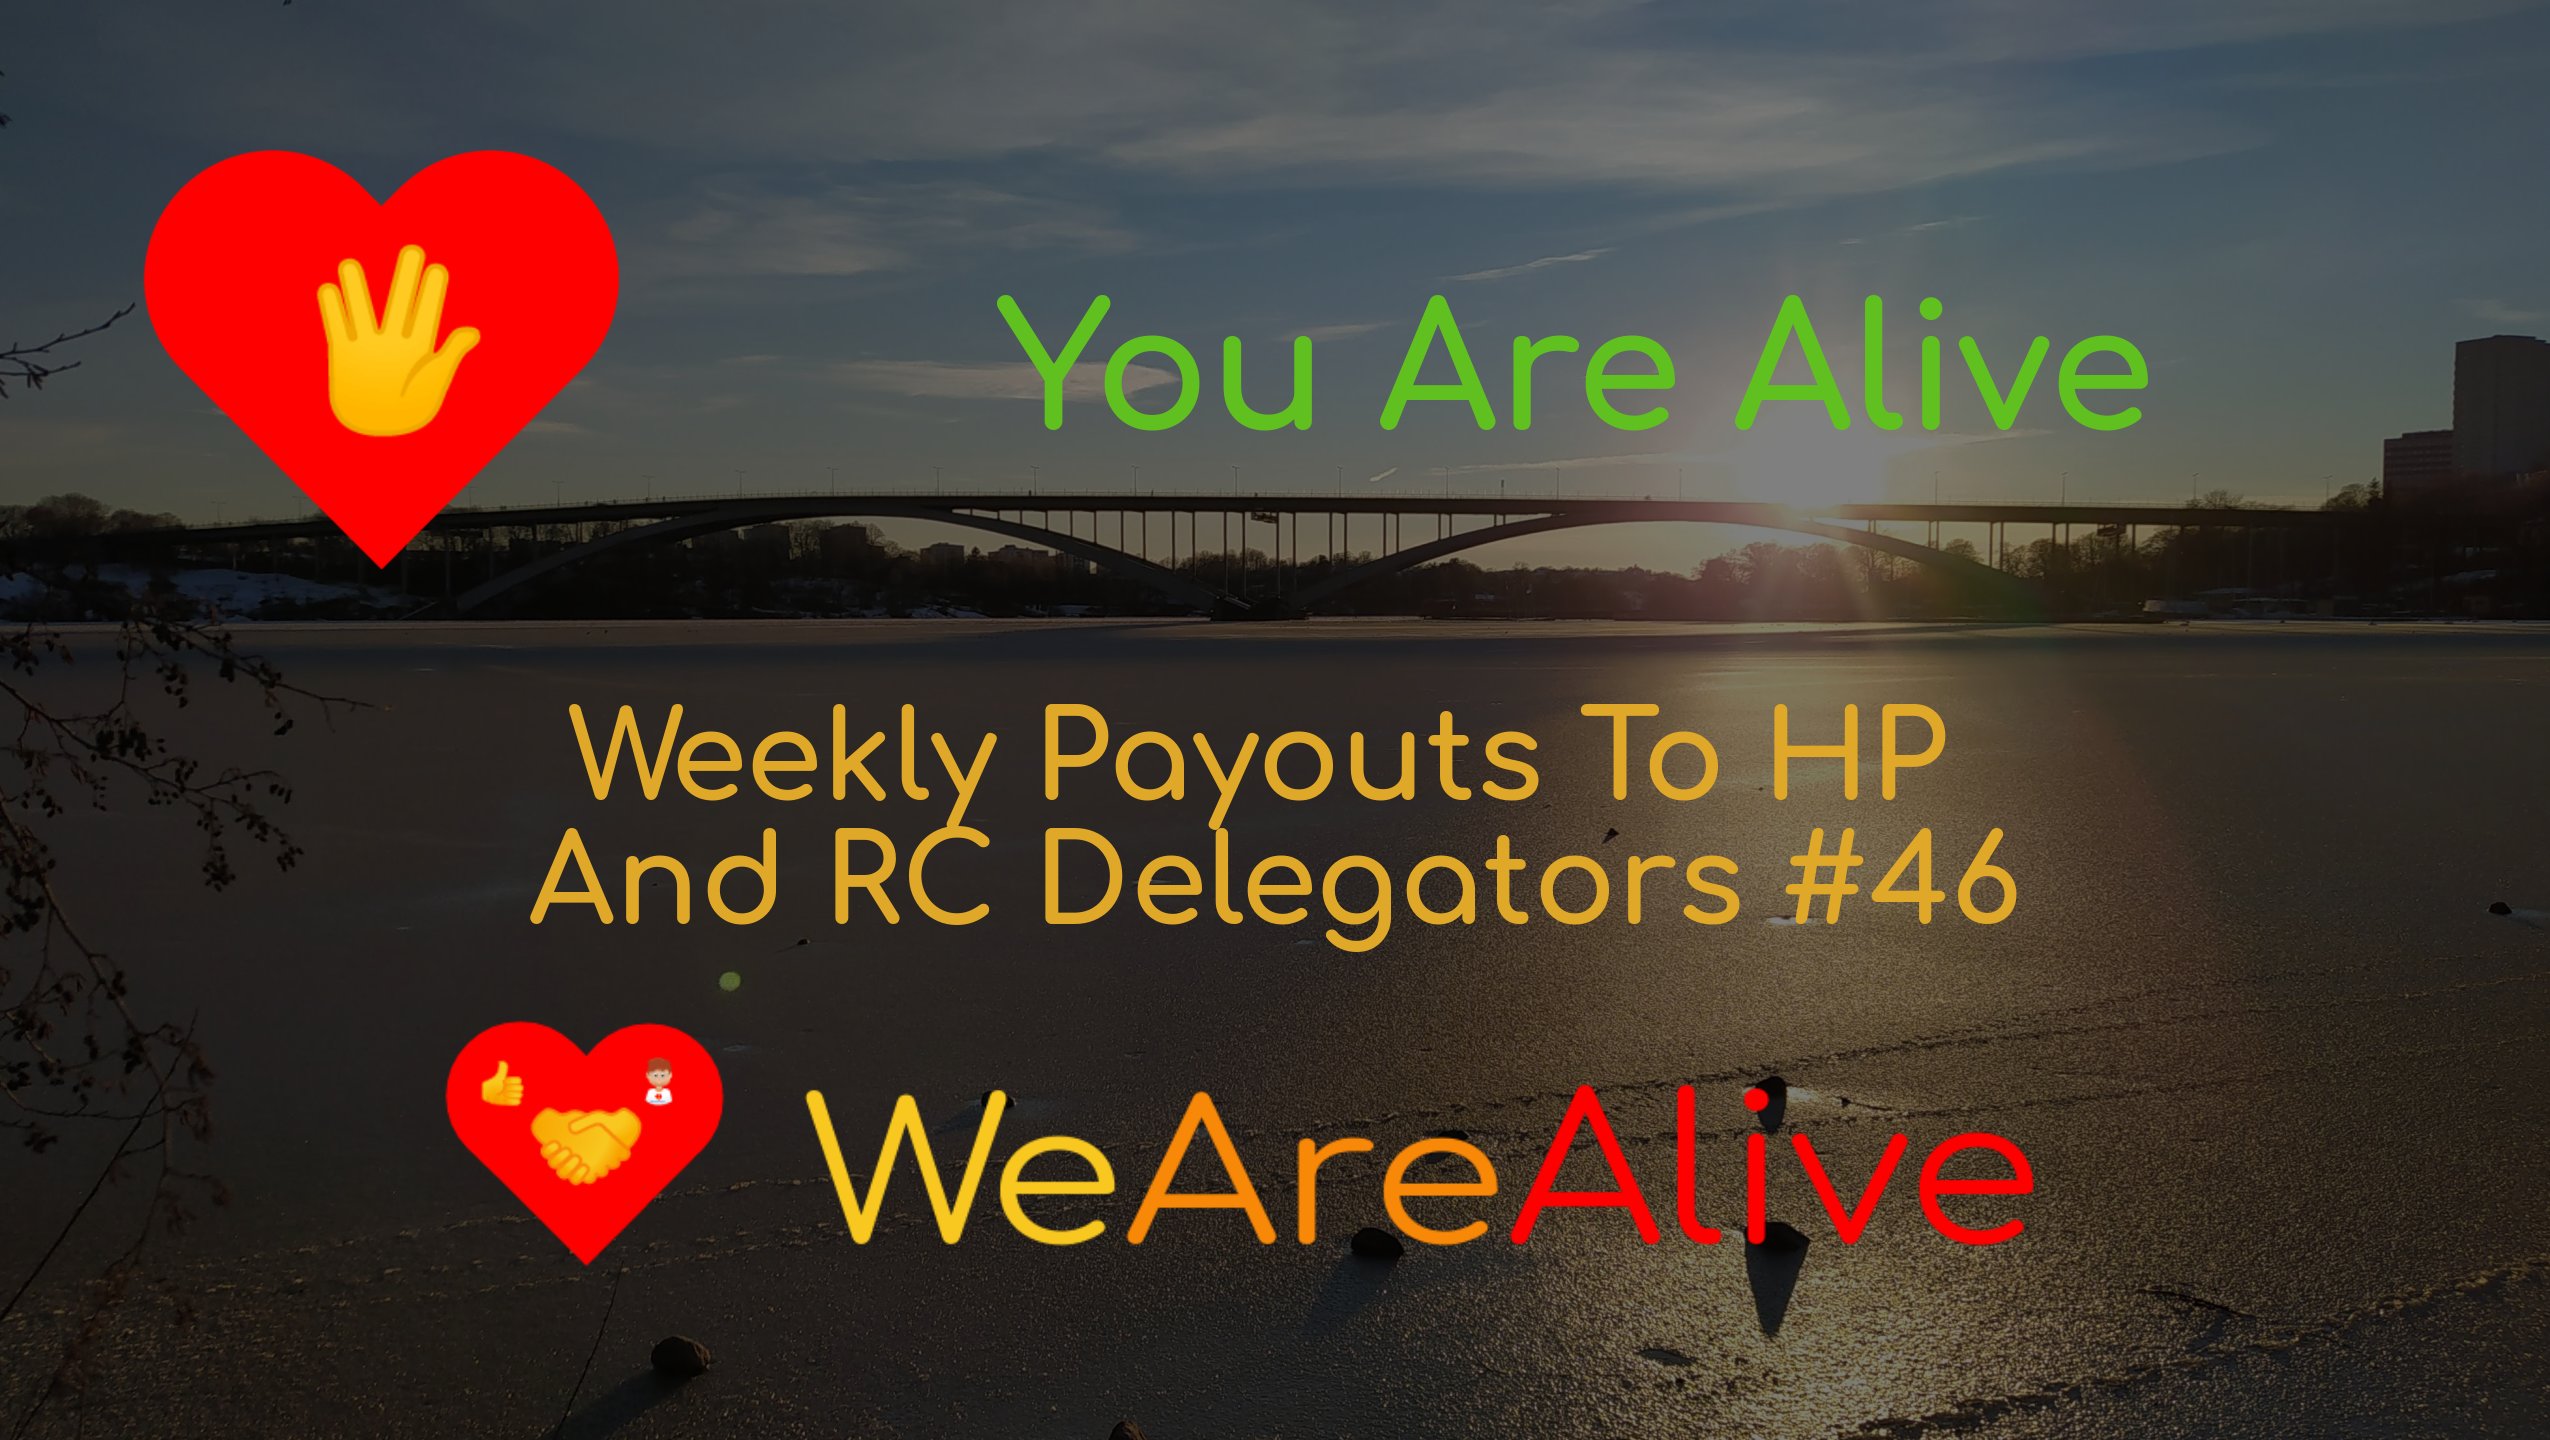 @youarealive/you-are-alive-weekly-payouts-to-hp-and-rc-delegators-46